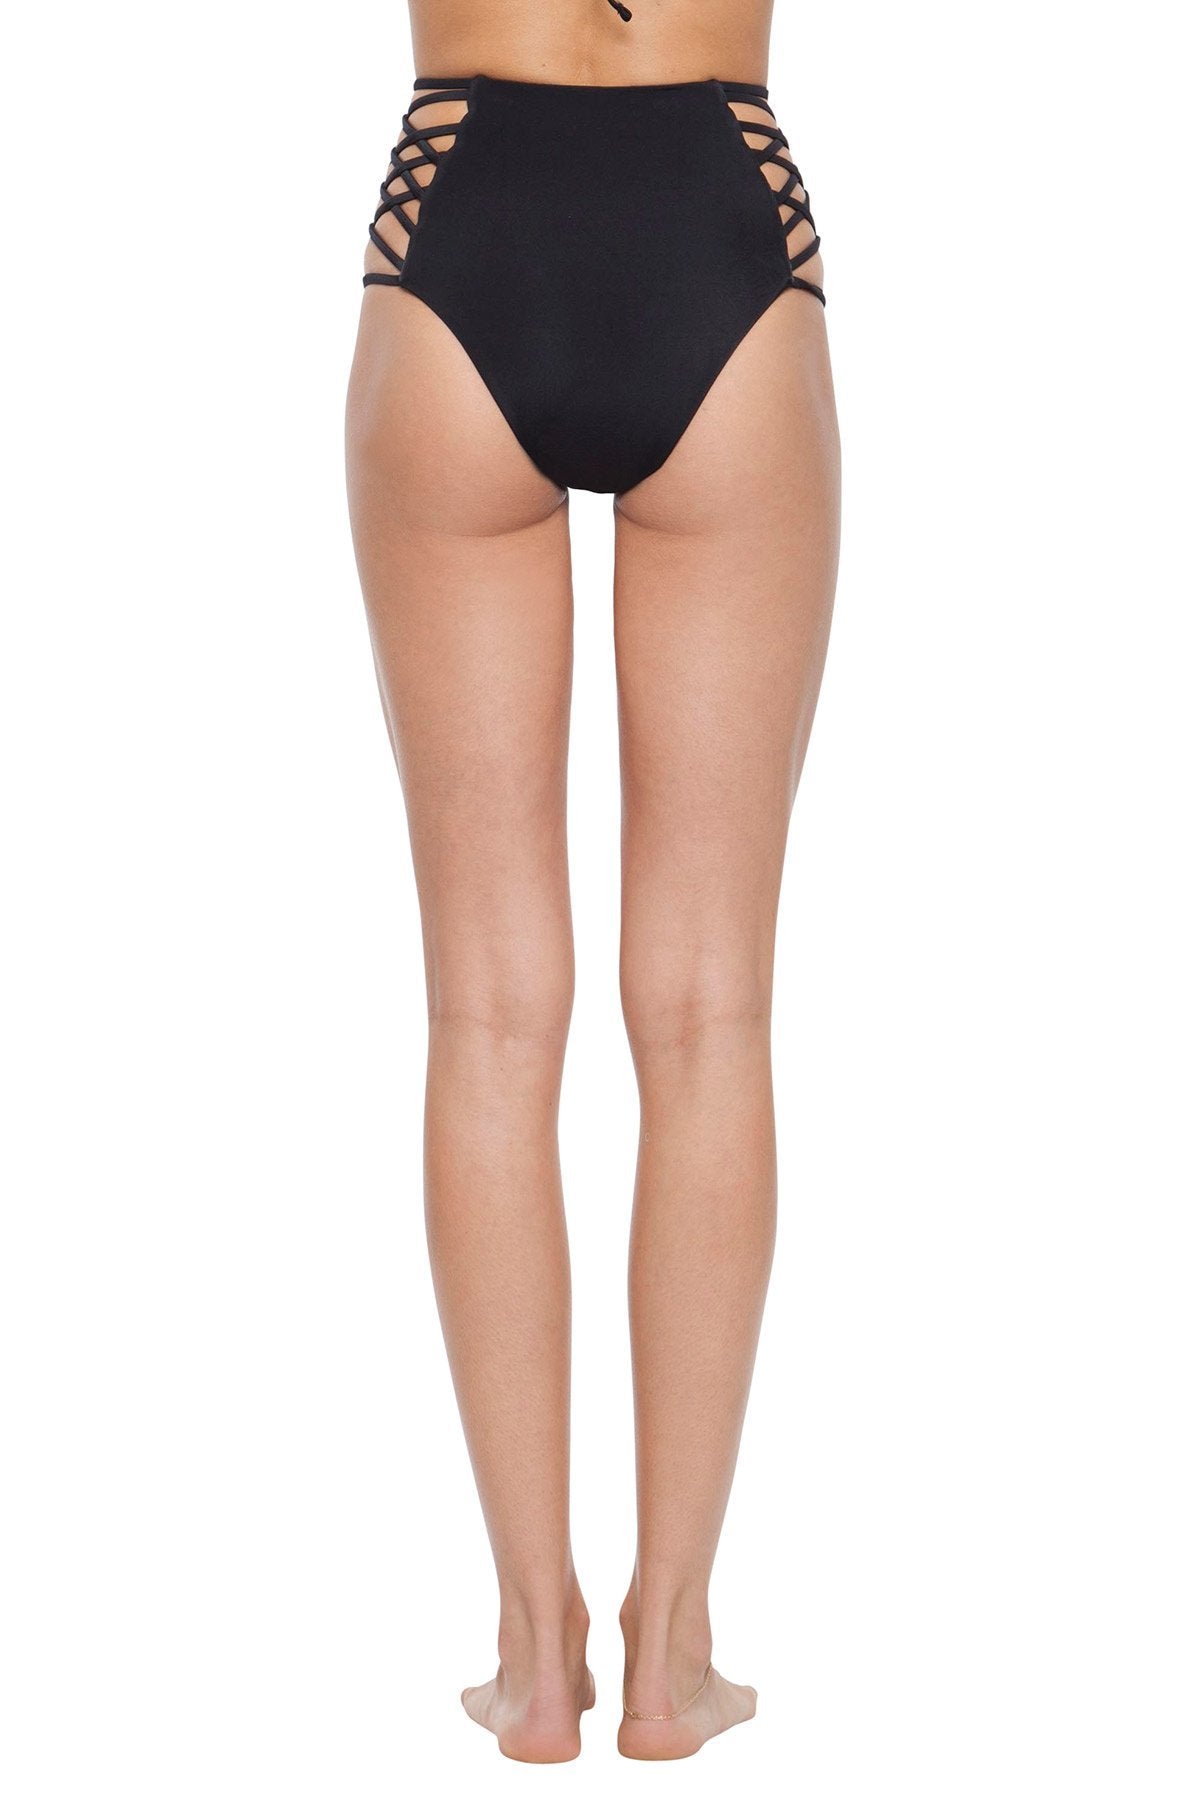 Black high waisted cut out bottoms